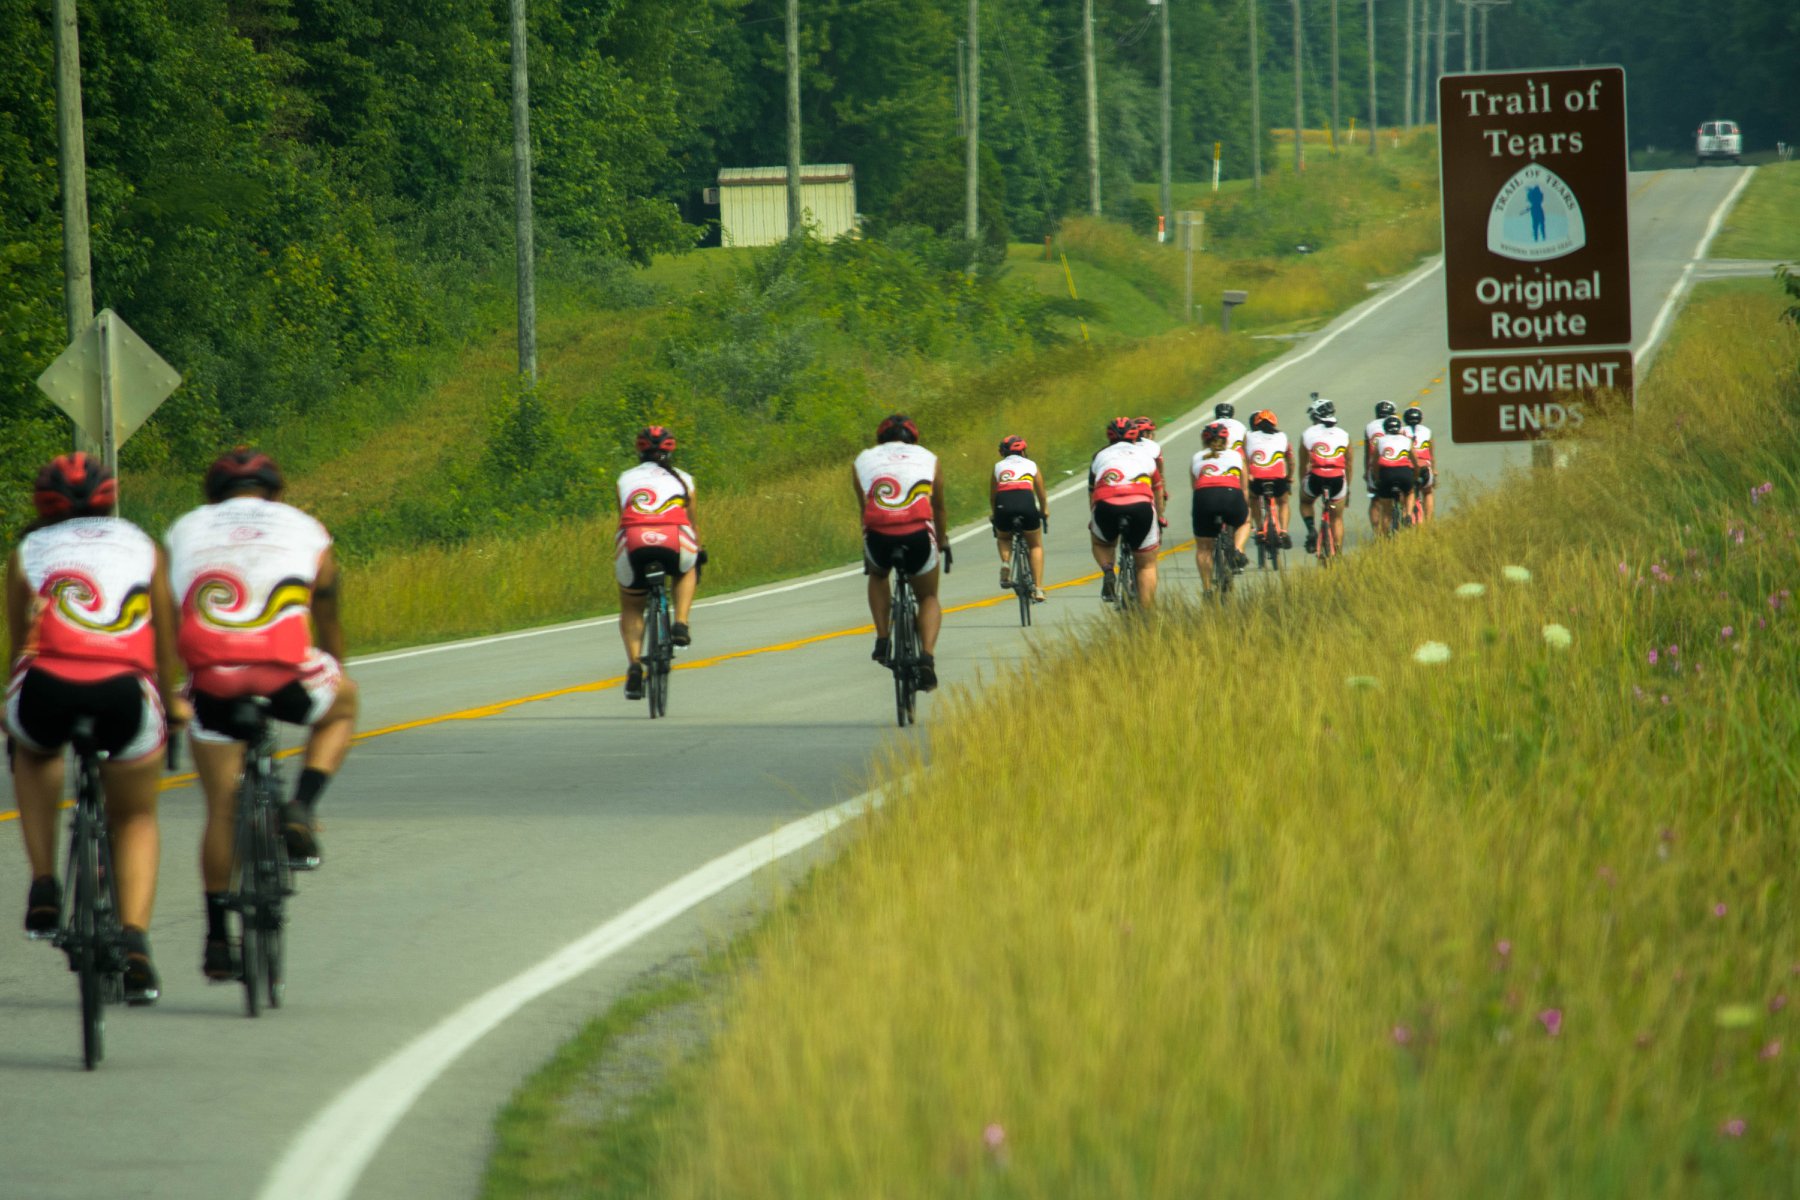 Cyclists ride past a sign reading "Trail of Tears Original Route"